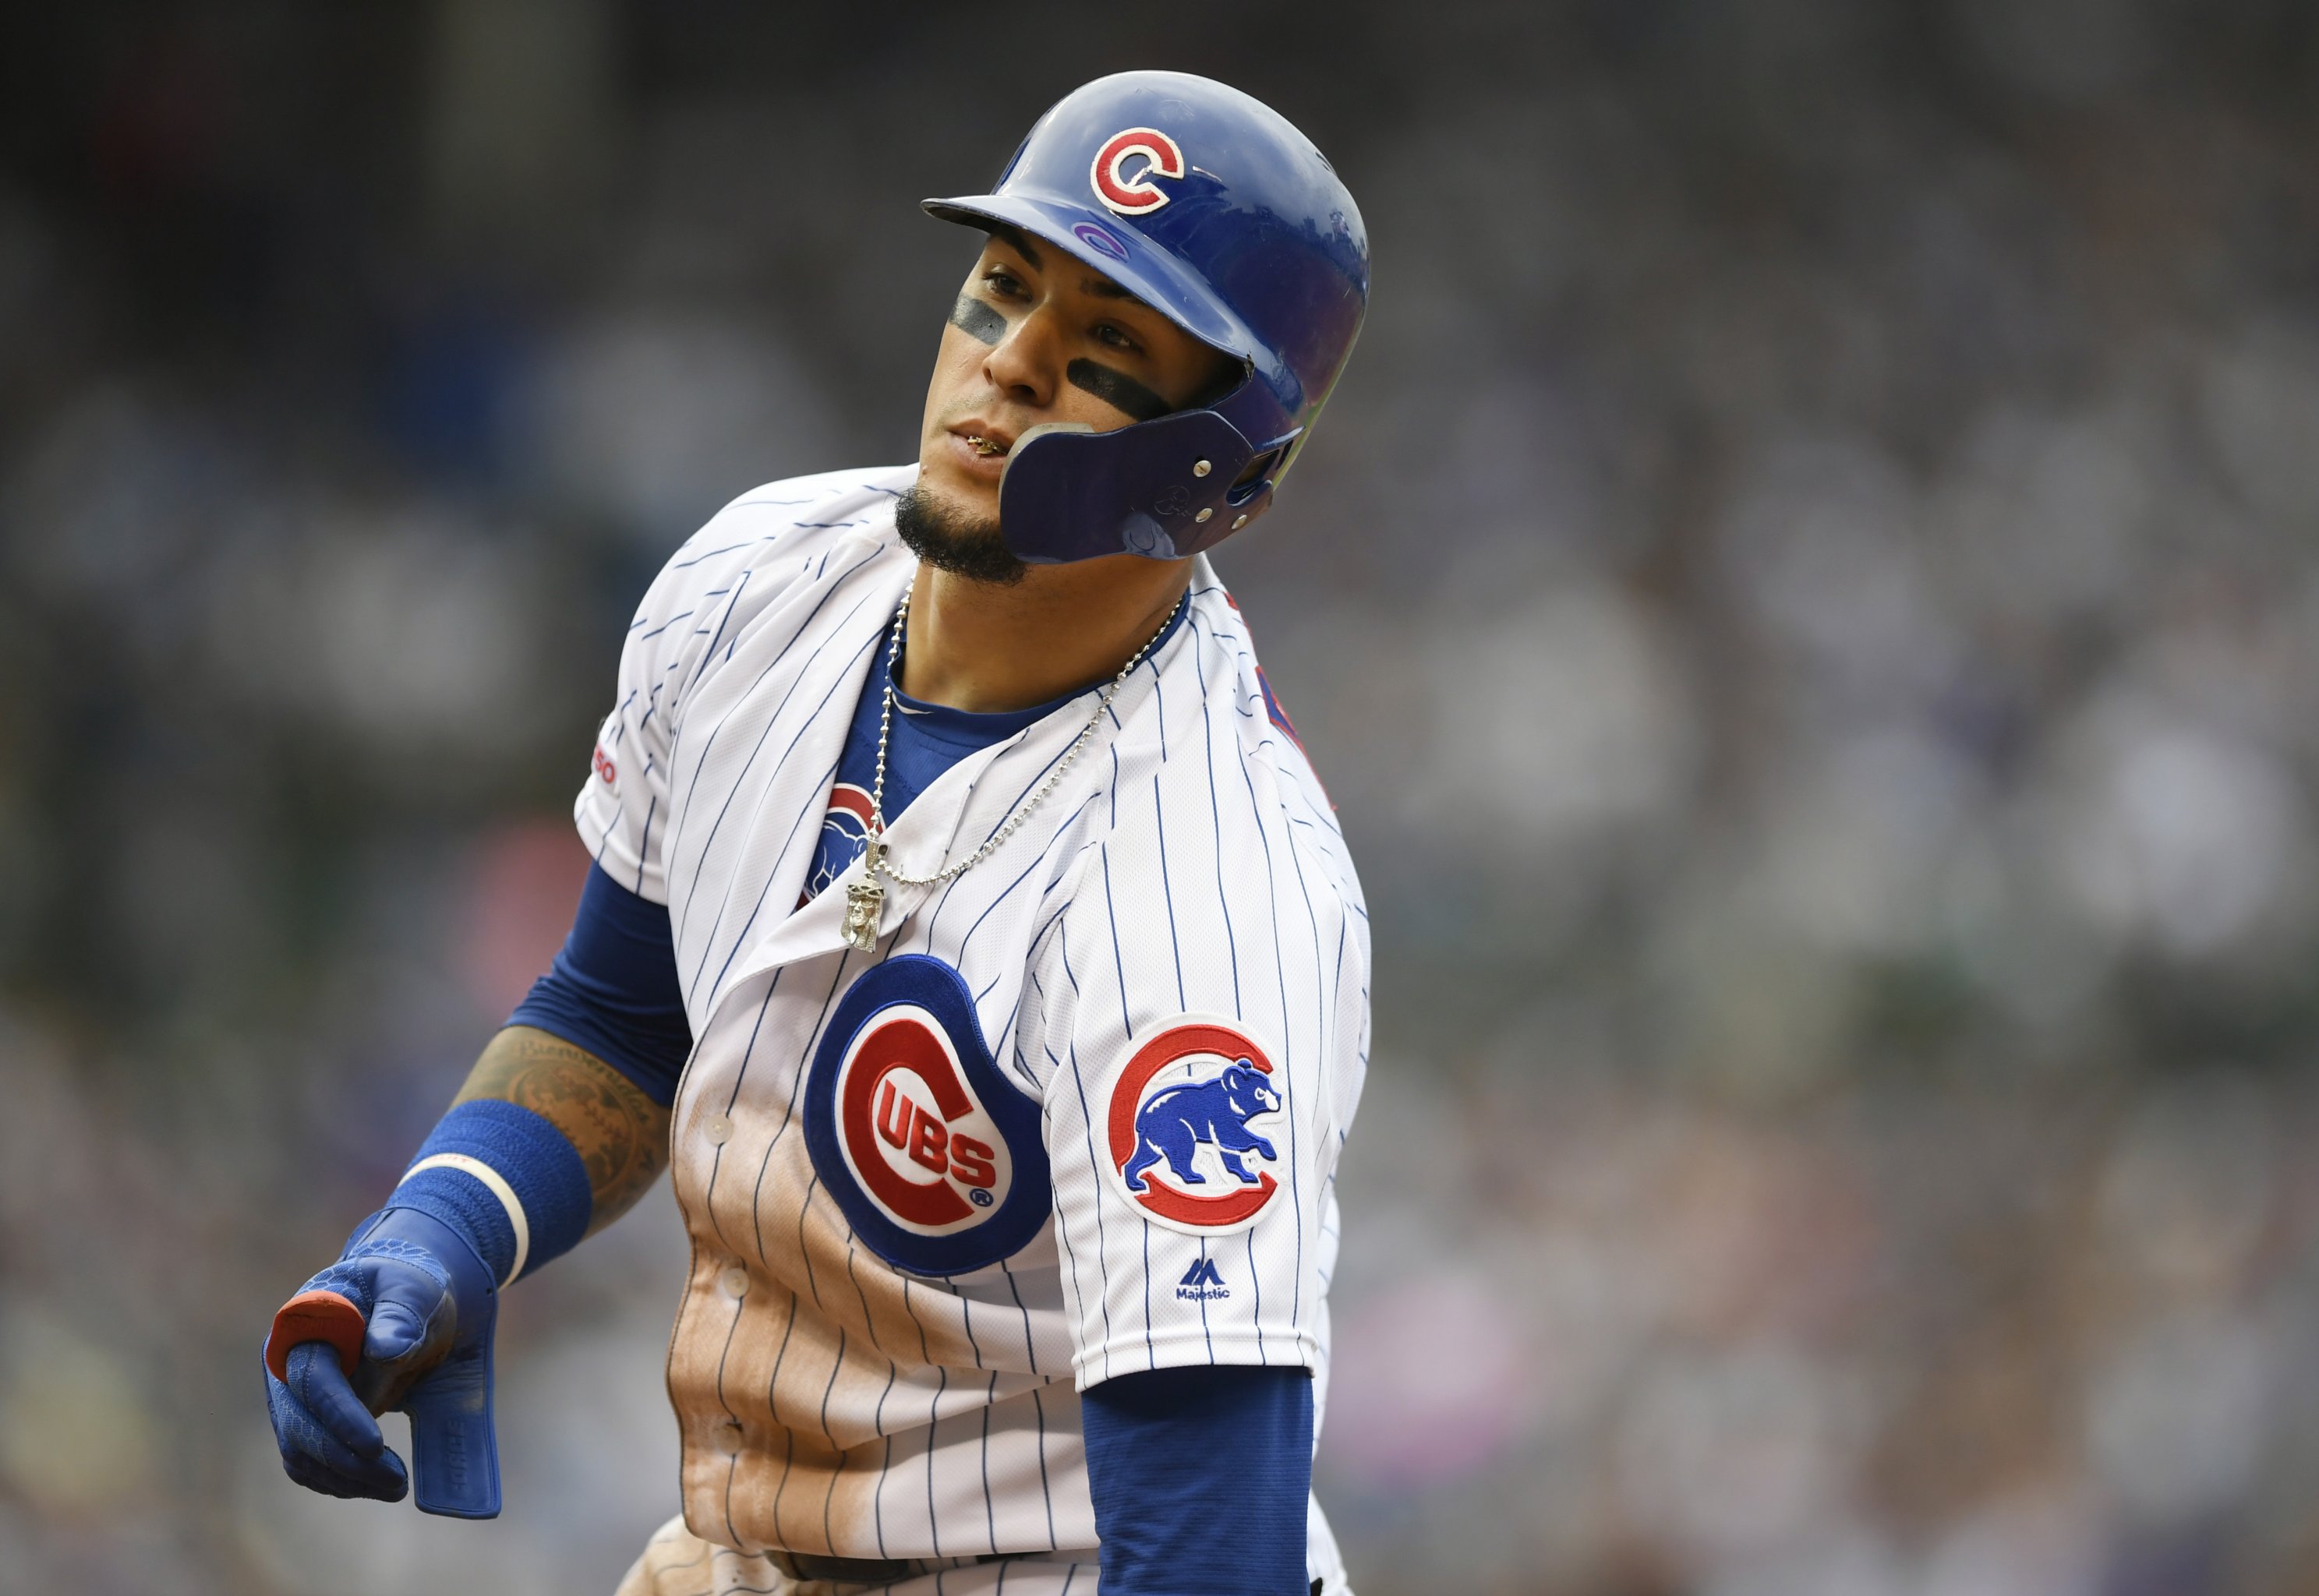 Javier Baez proved he is 'El Mago' by creating an 'Angels in the